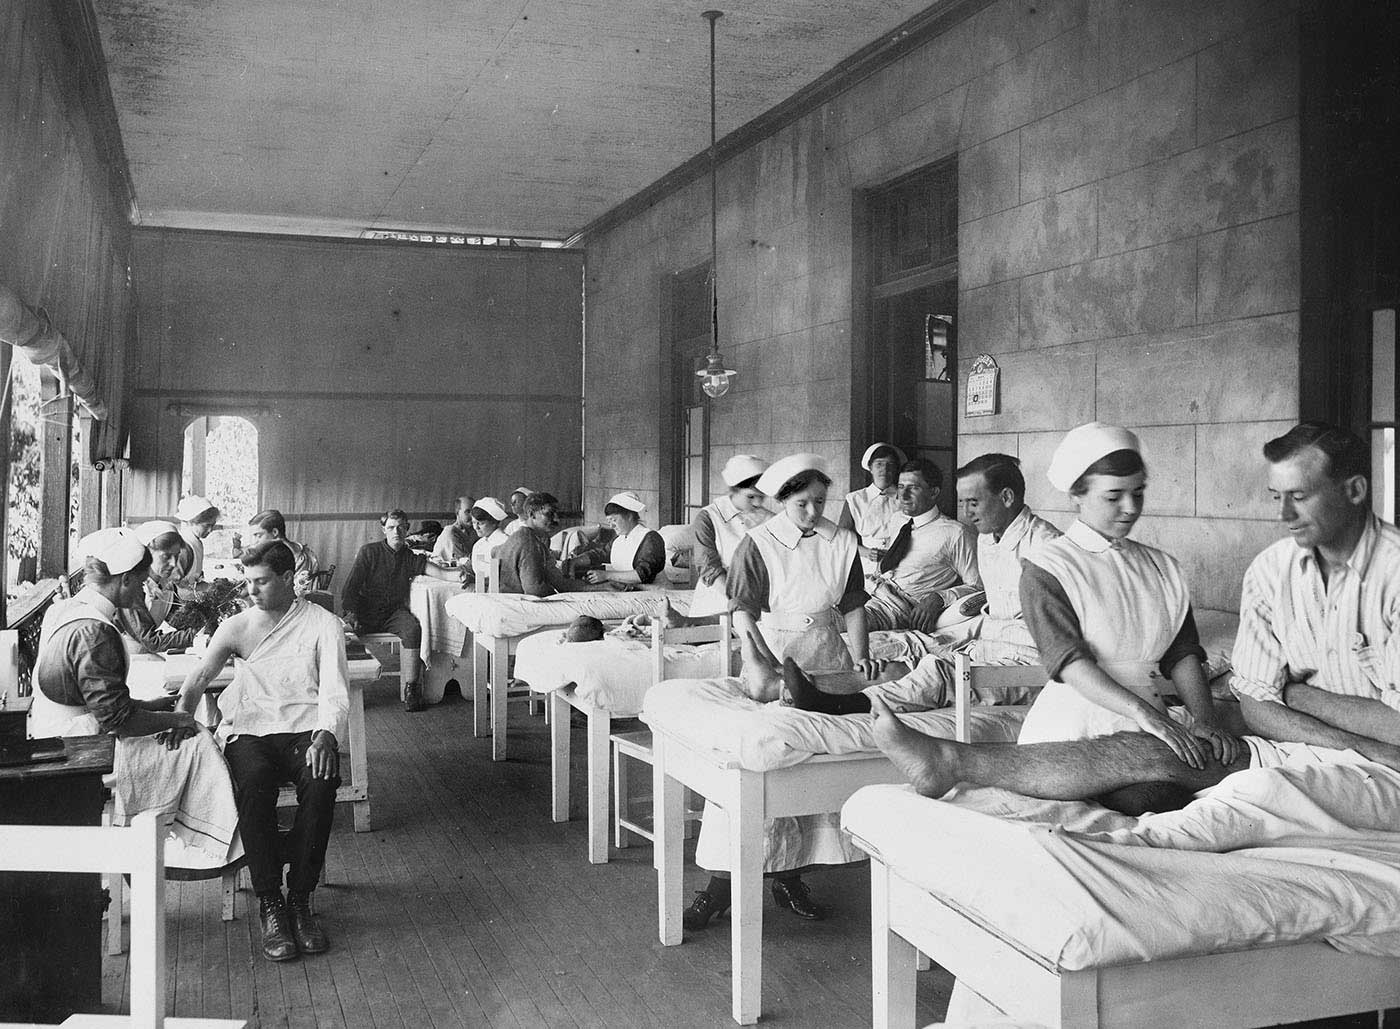 Nurses are tending to wounded soldiers in a ward.